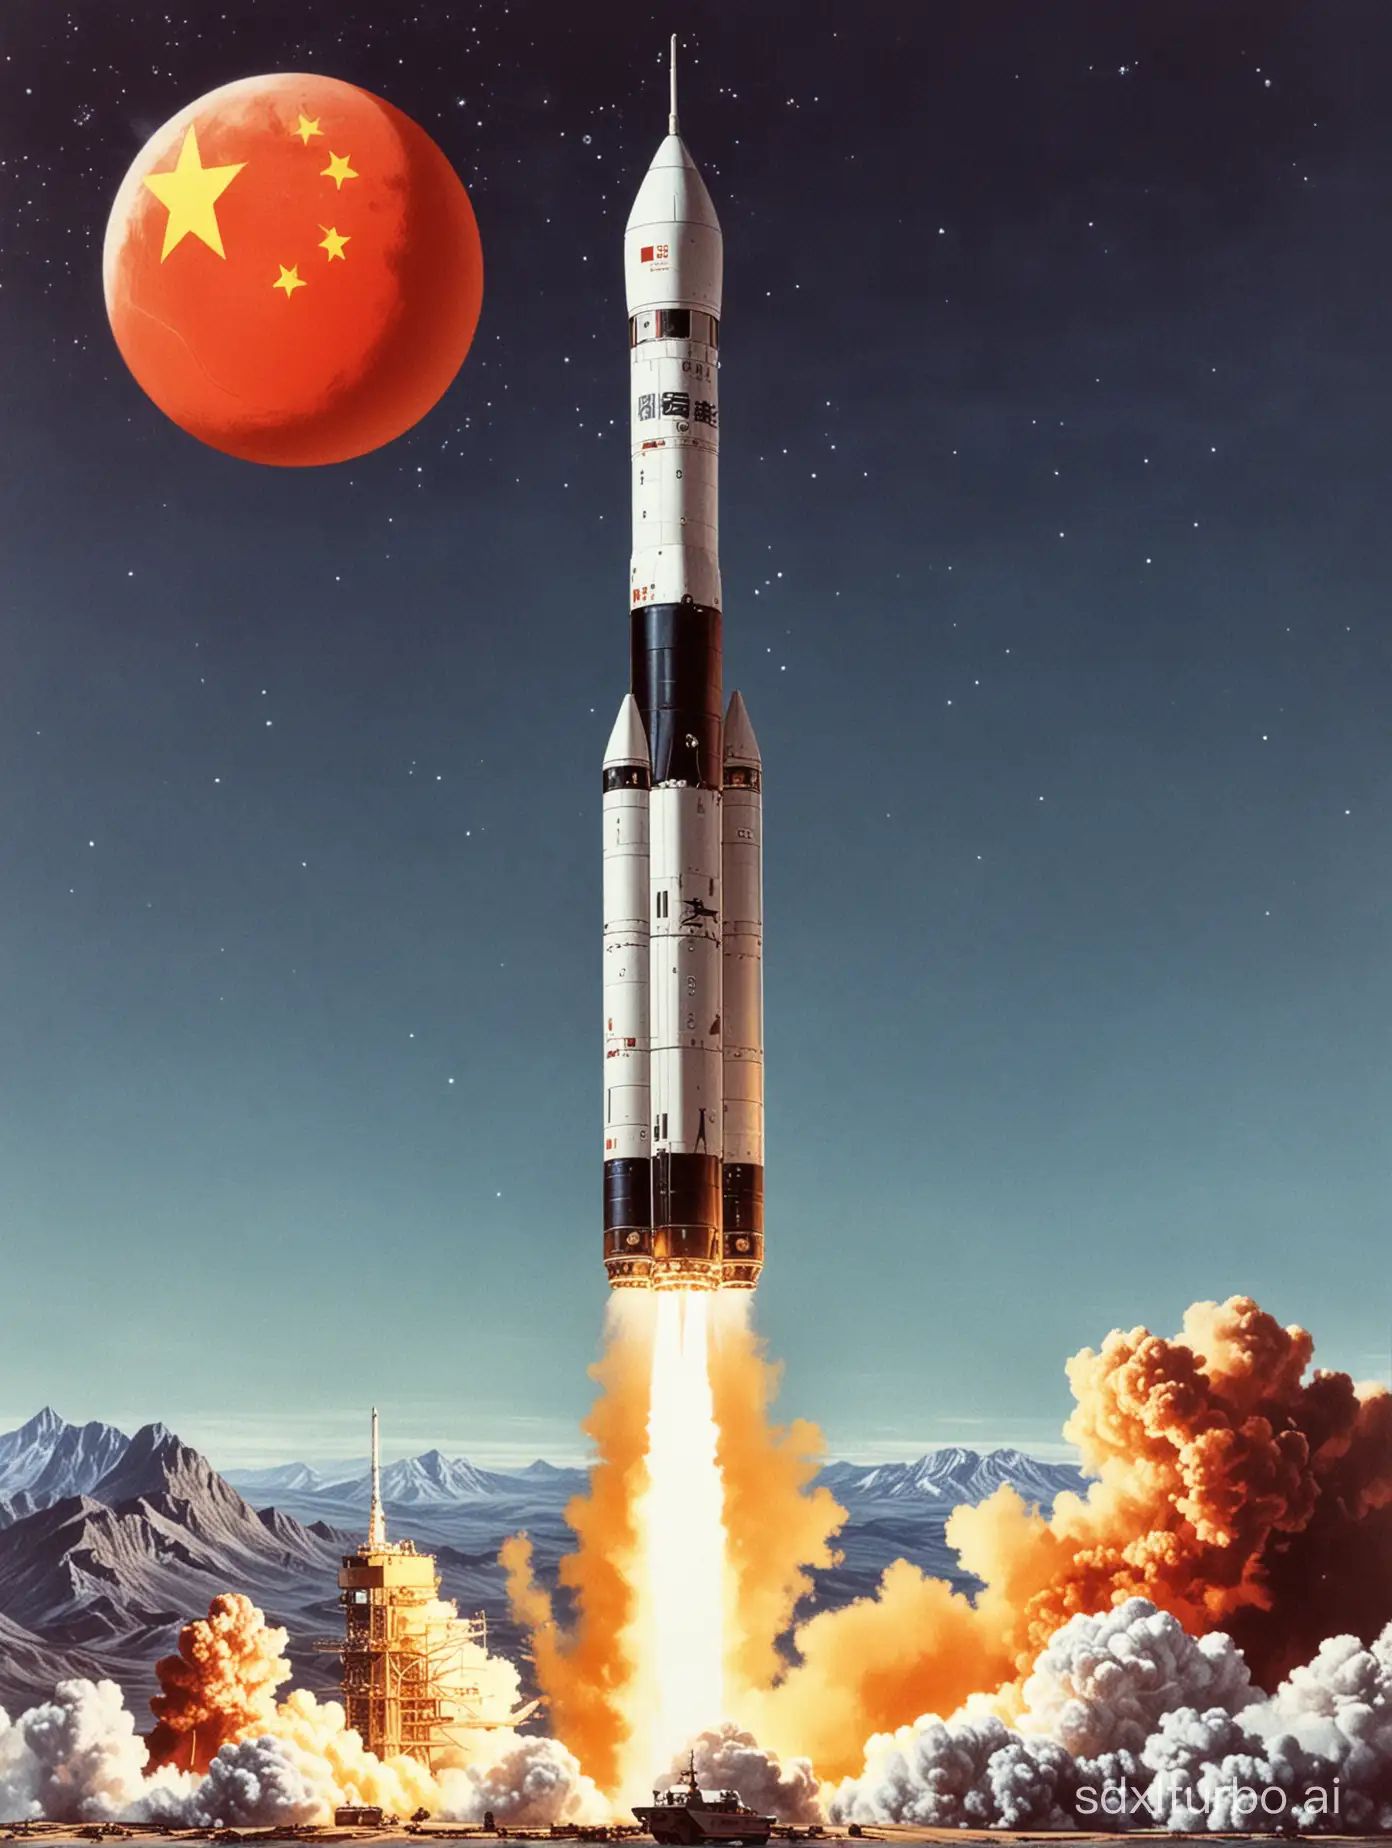 The first artificial satellite launched by China on April 24, 1970. Design a poster about the 'Dongfanghong-1 satellite' for 'China Aerospace Day'.